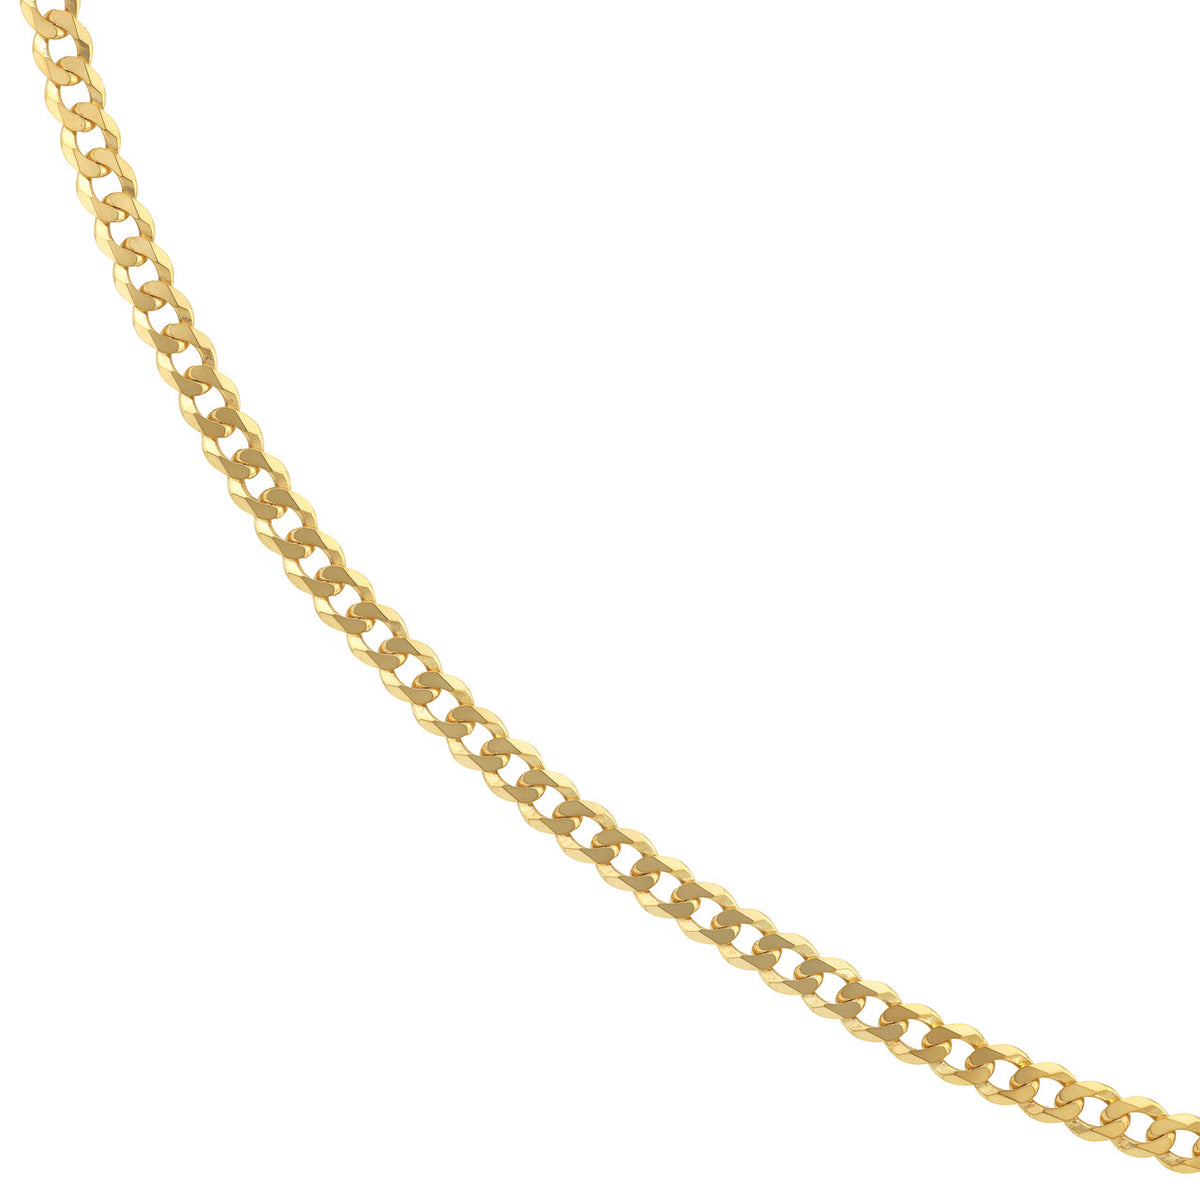 14K Yellow Gold or White Gold 7mm Curb Chain Necklace with Lobster Lock